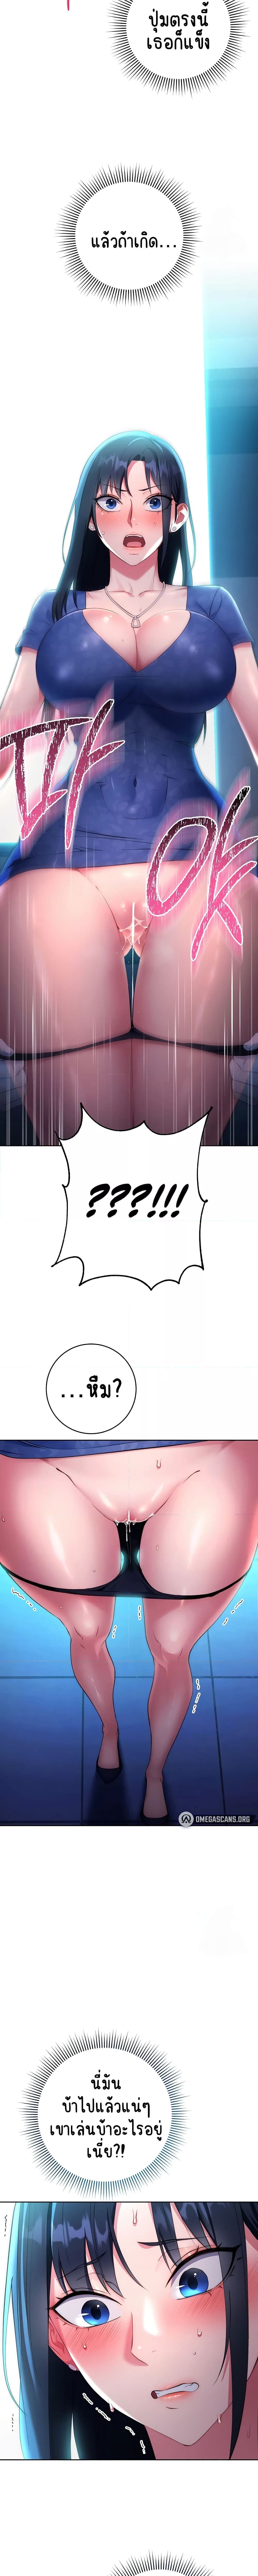 Outsider: The Invisible Man ตอนที่ 5 ภาพ 5